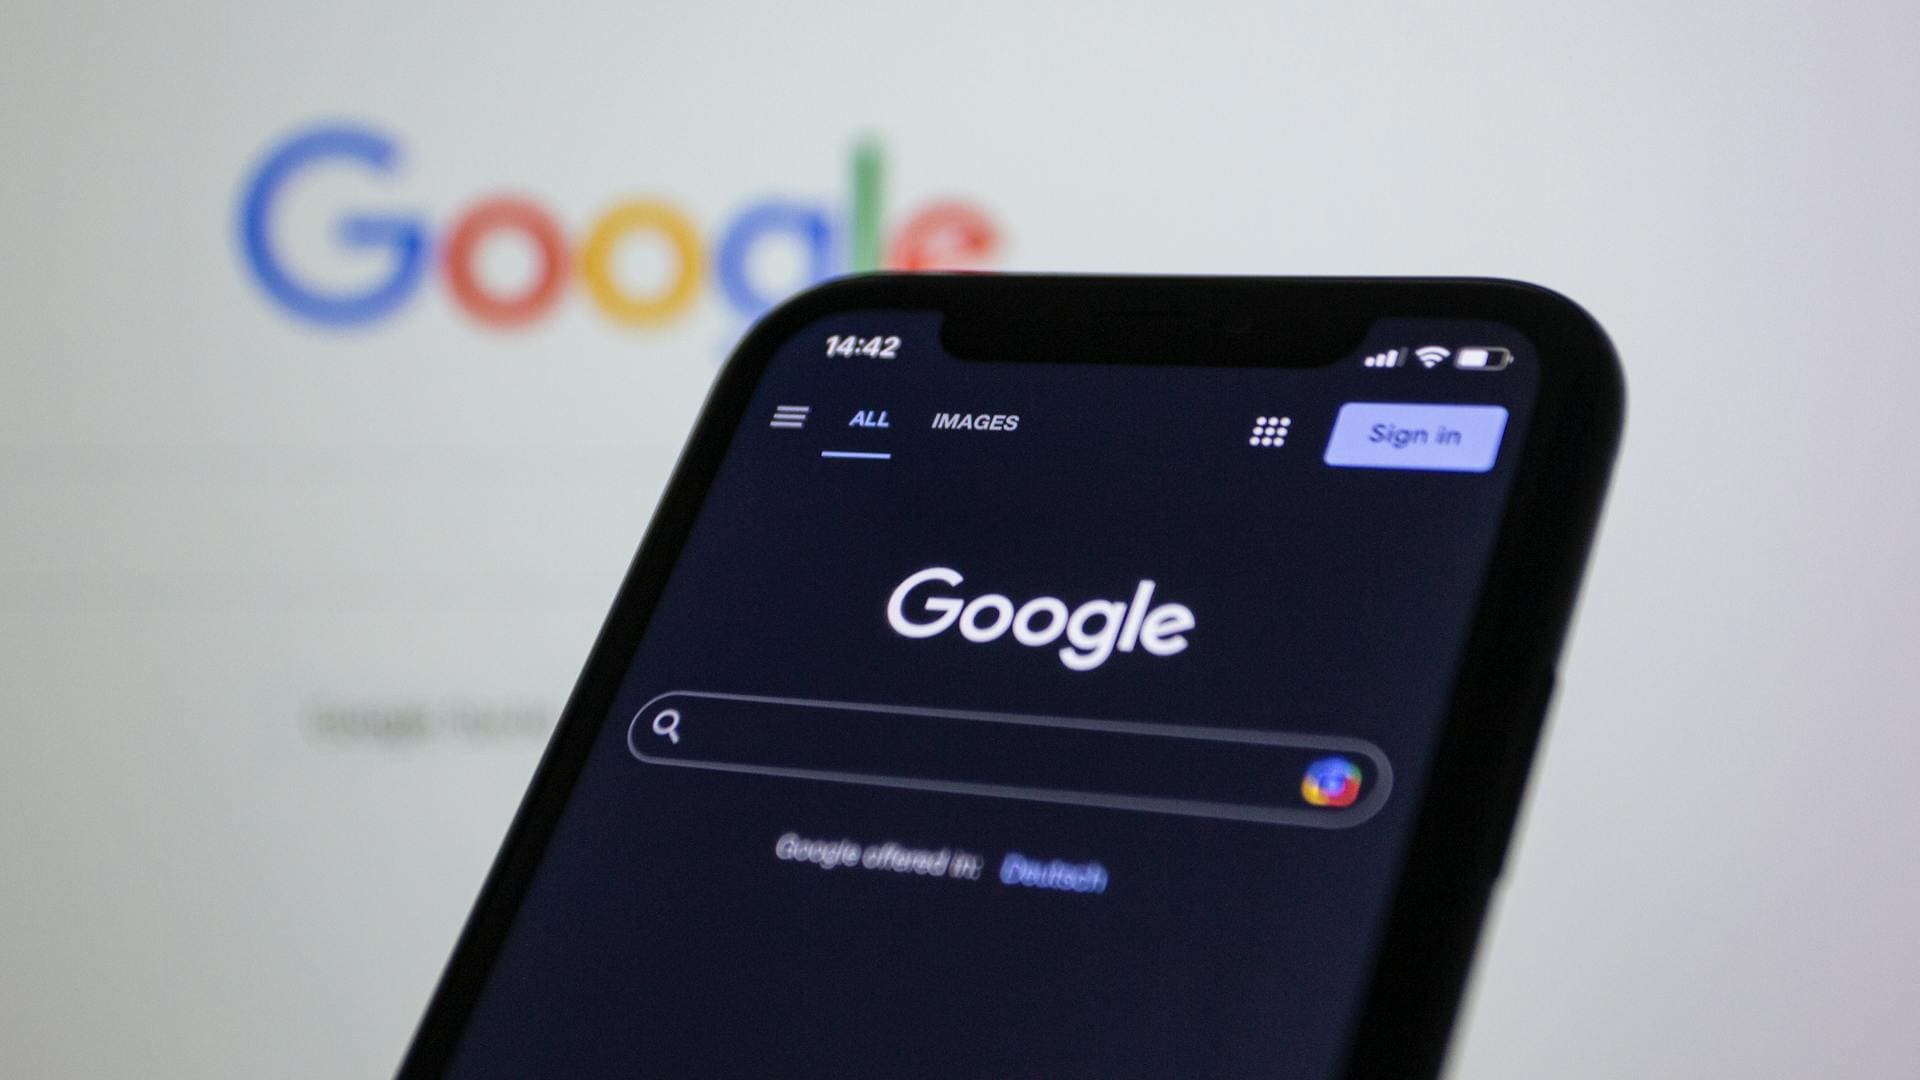 E-Commerce Developer; The image shows a close-up of a cell phone with the Google search bar displayed on the screen. The time is 2:42 pm and the language is set to Dutch.  There are four options displayed below the search bar: All, Images, Sign in, and Google.